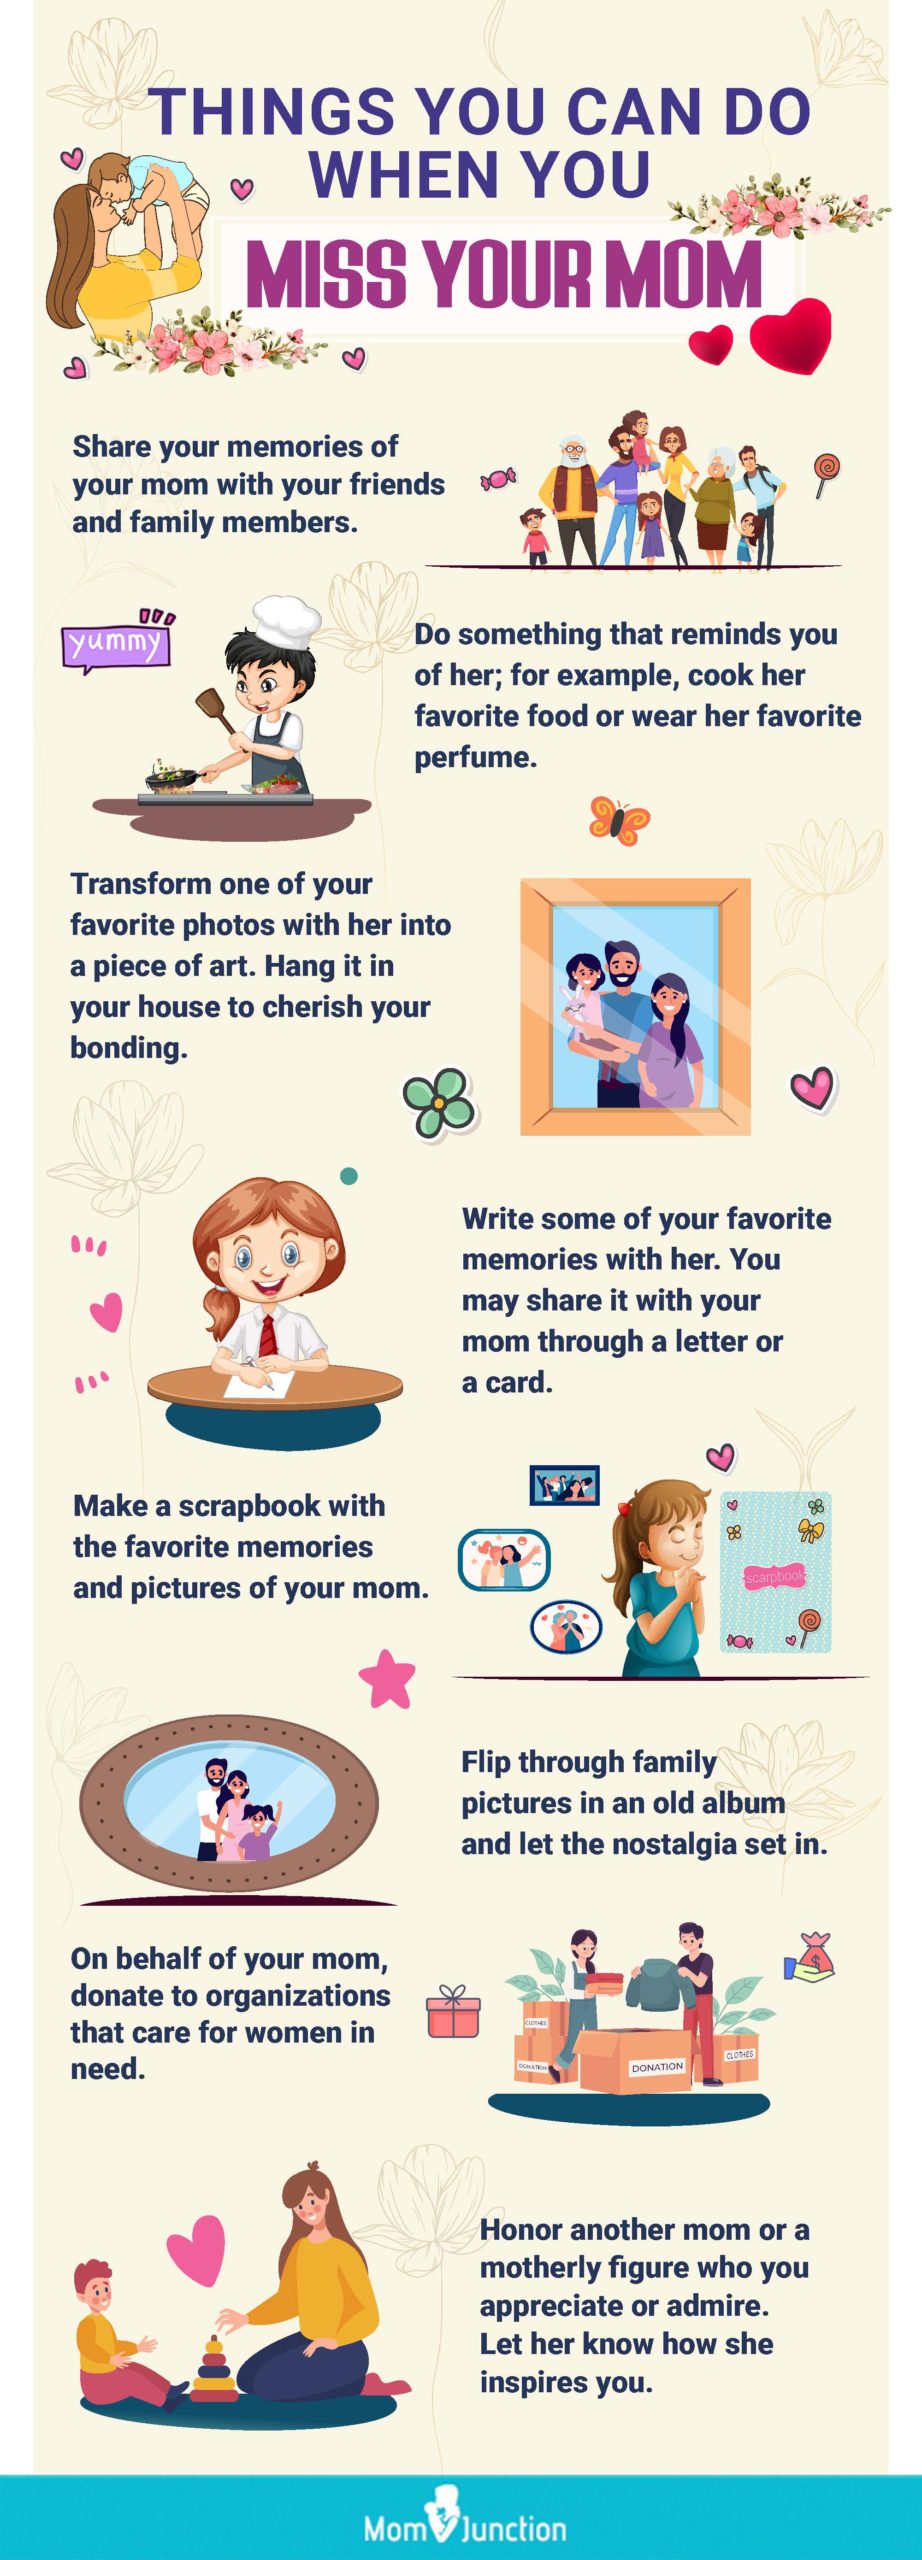 101 melting quotes about missing mom [infographic]